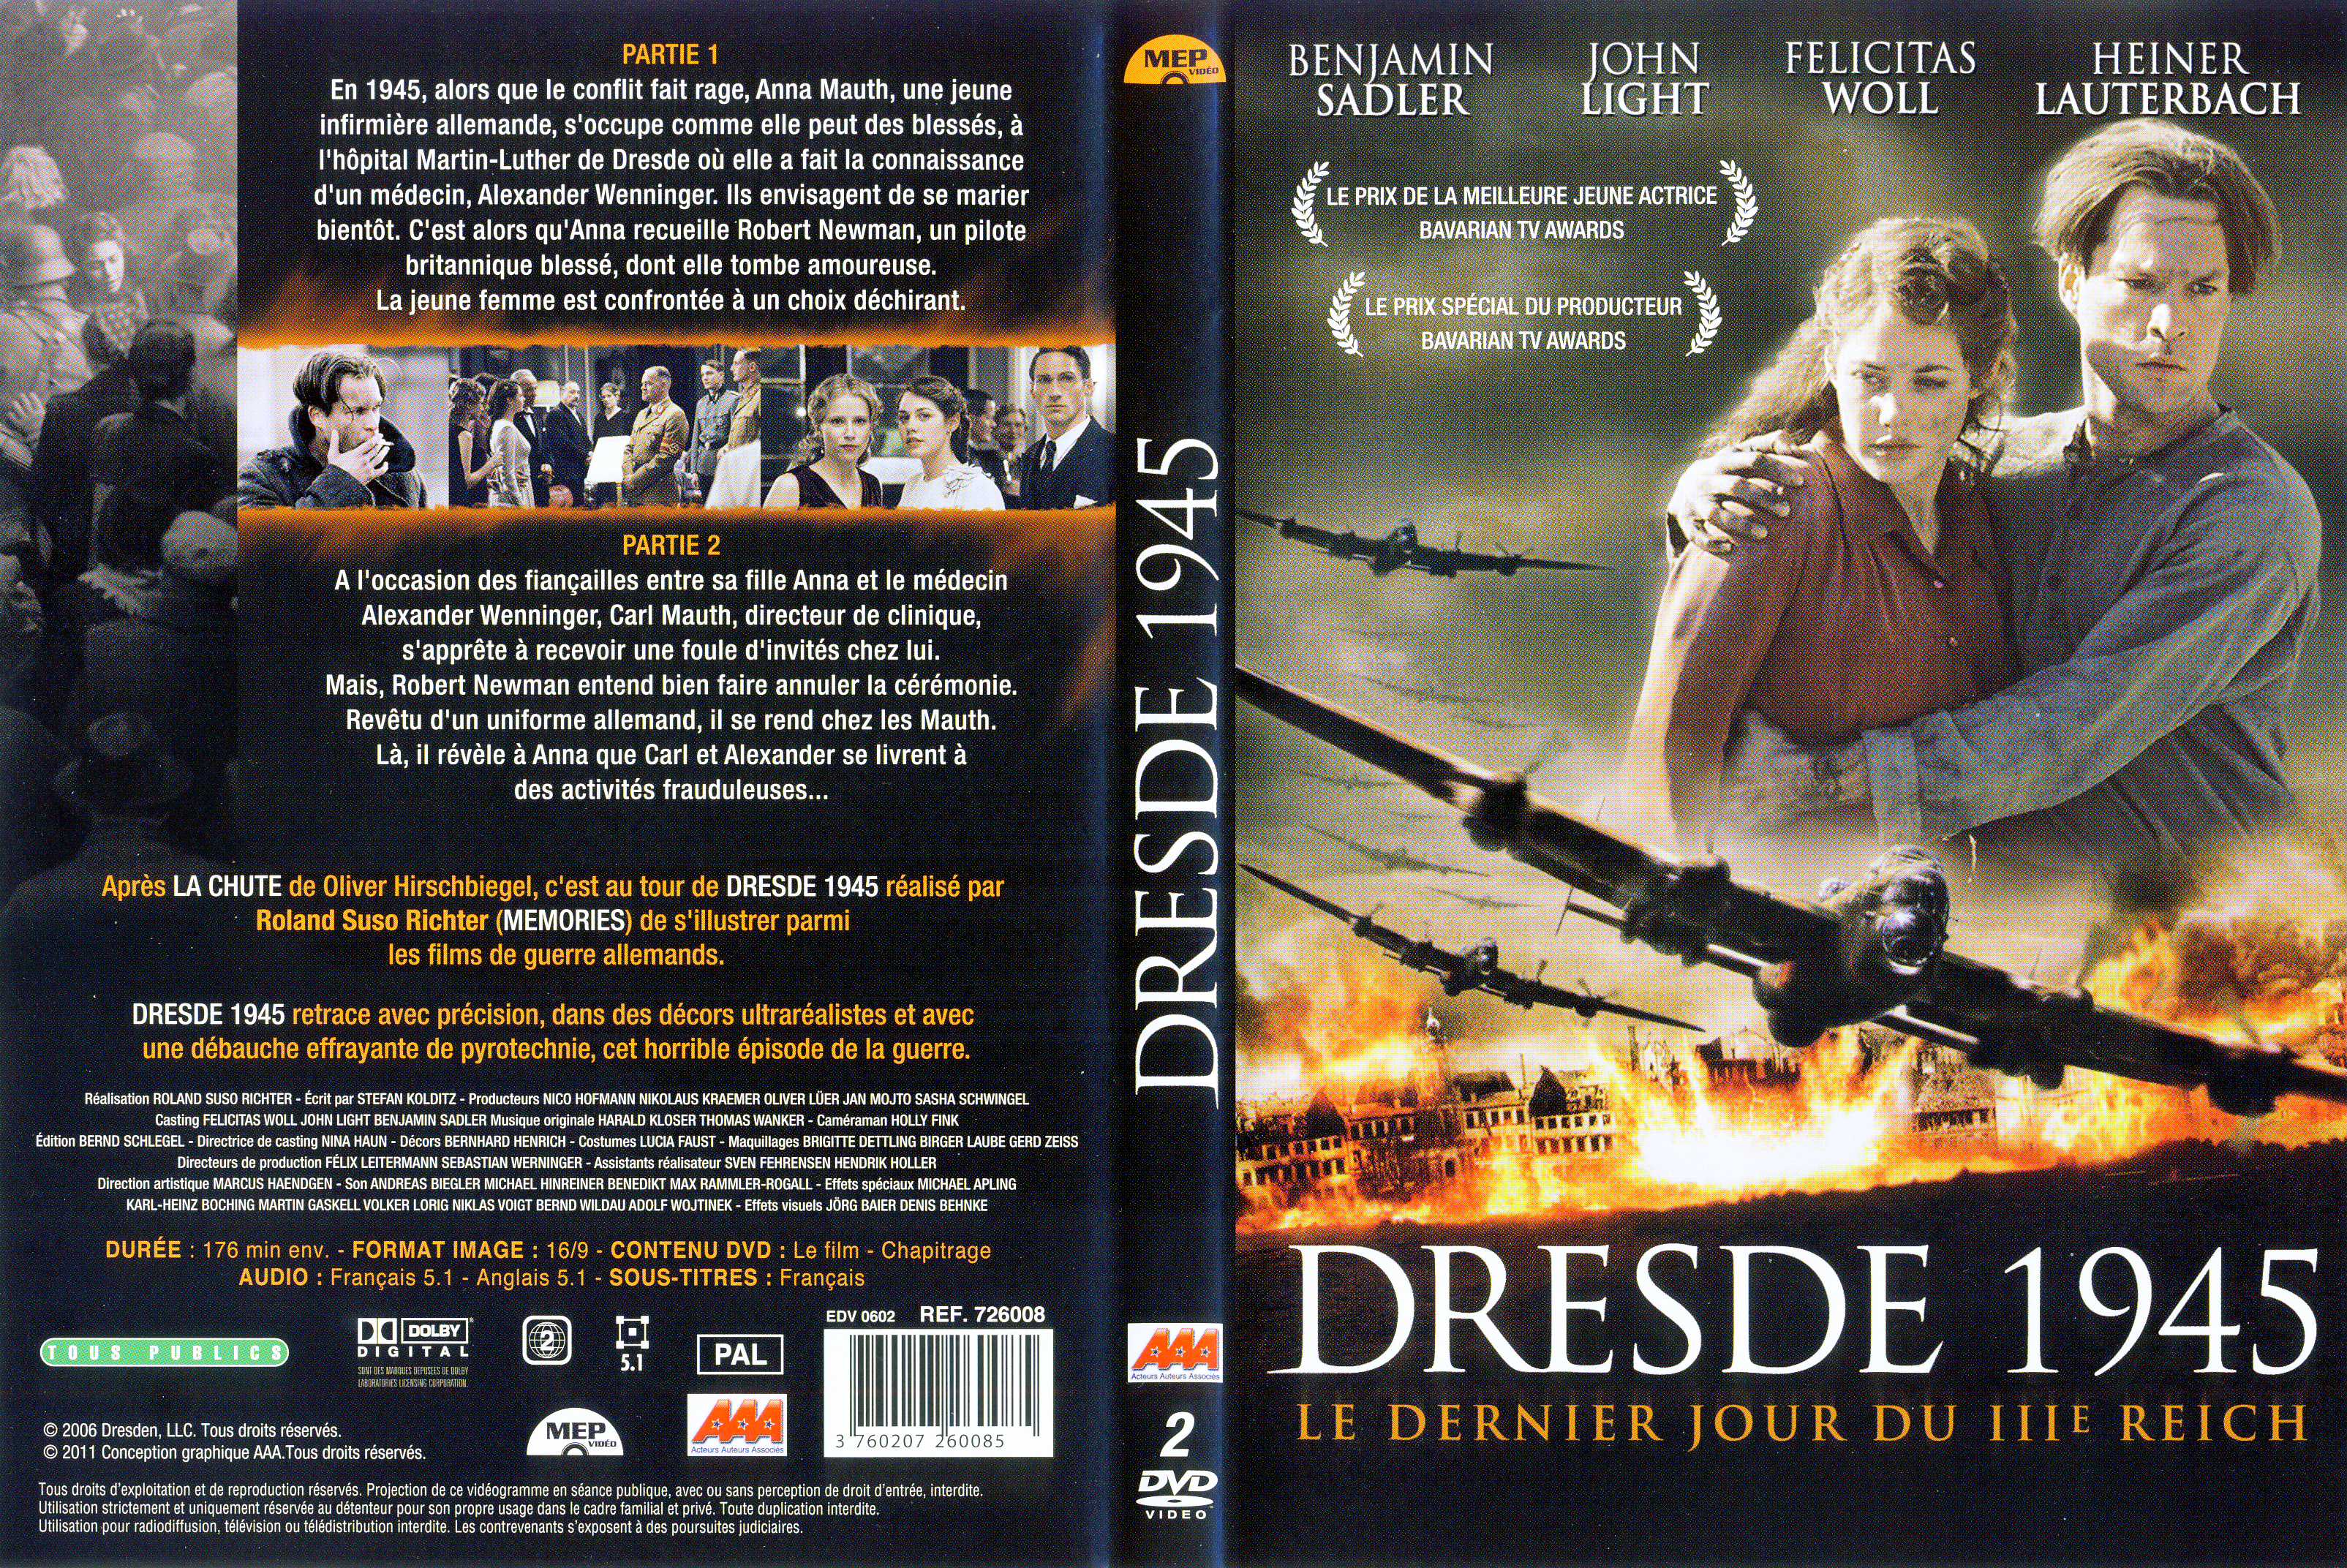 Jaquette DVD Dresde 1945